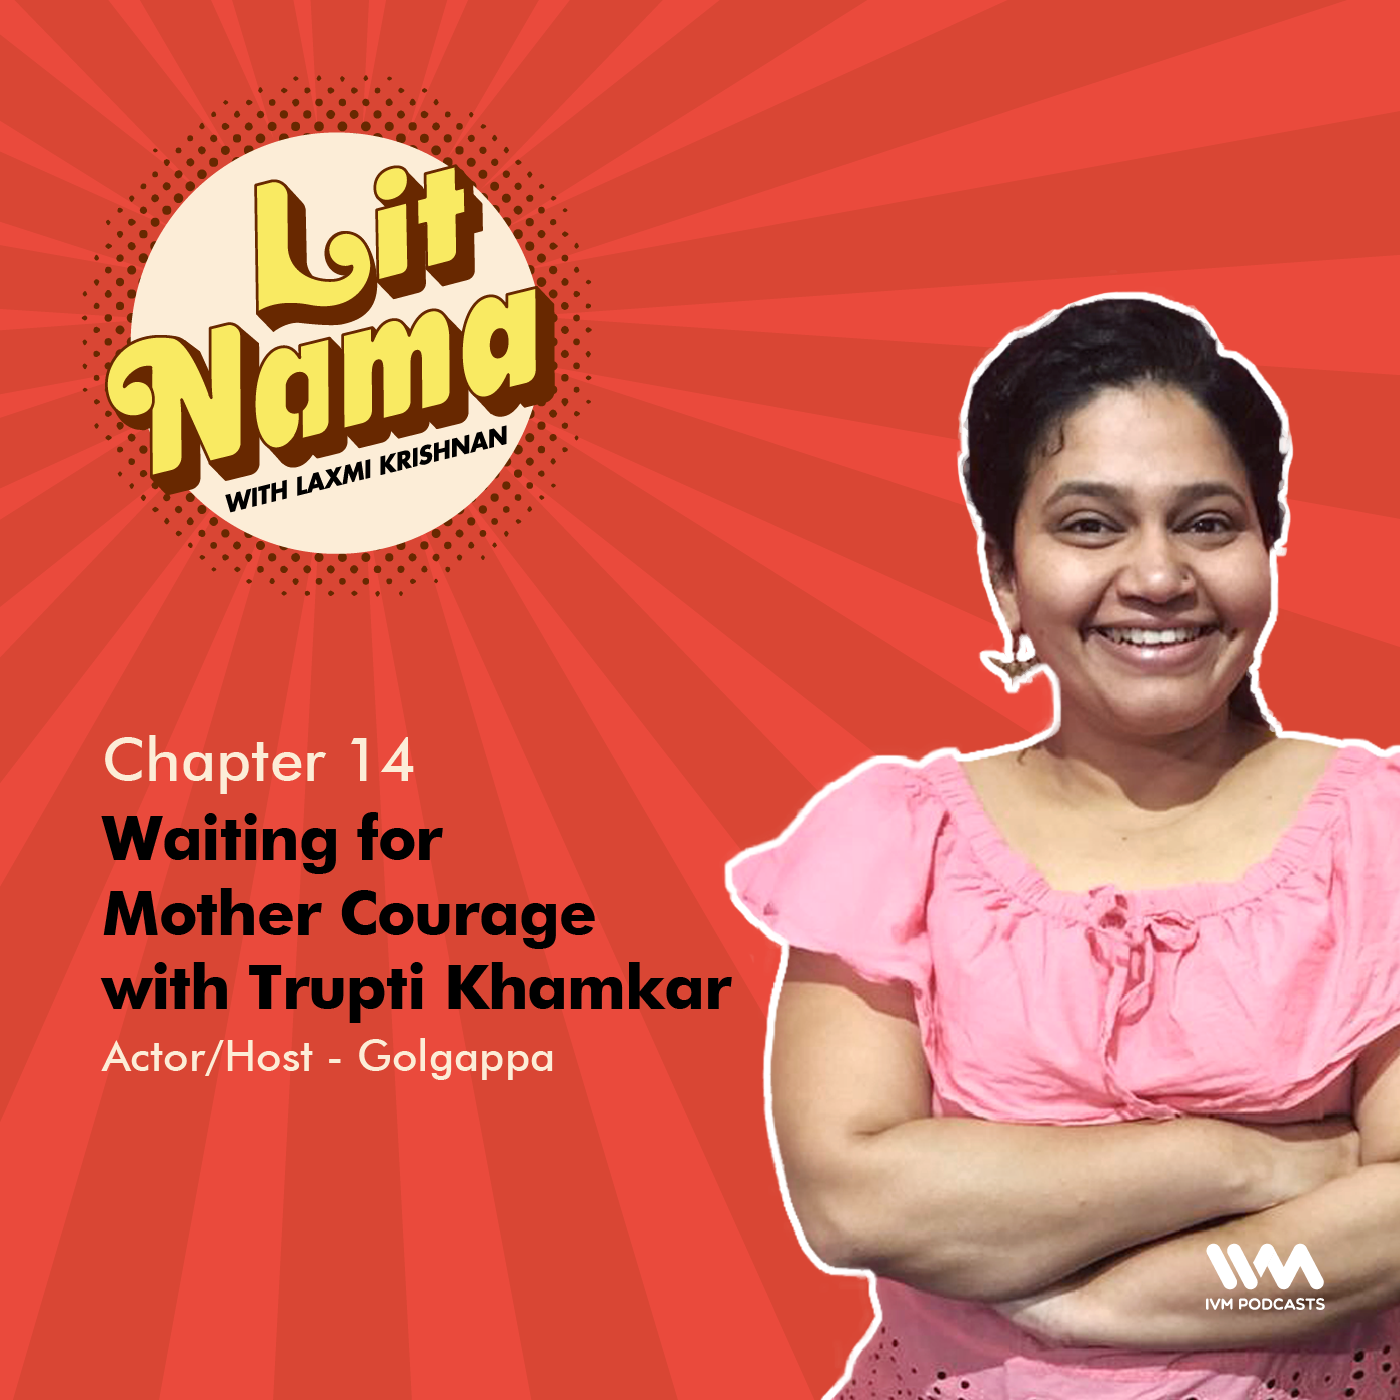 Chapter. 14: Waiting for Mother Courage with Trupti Khamkar